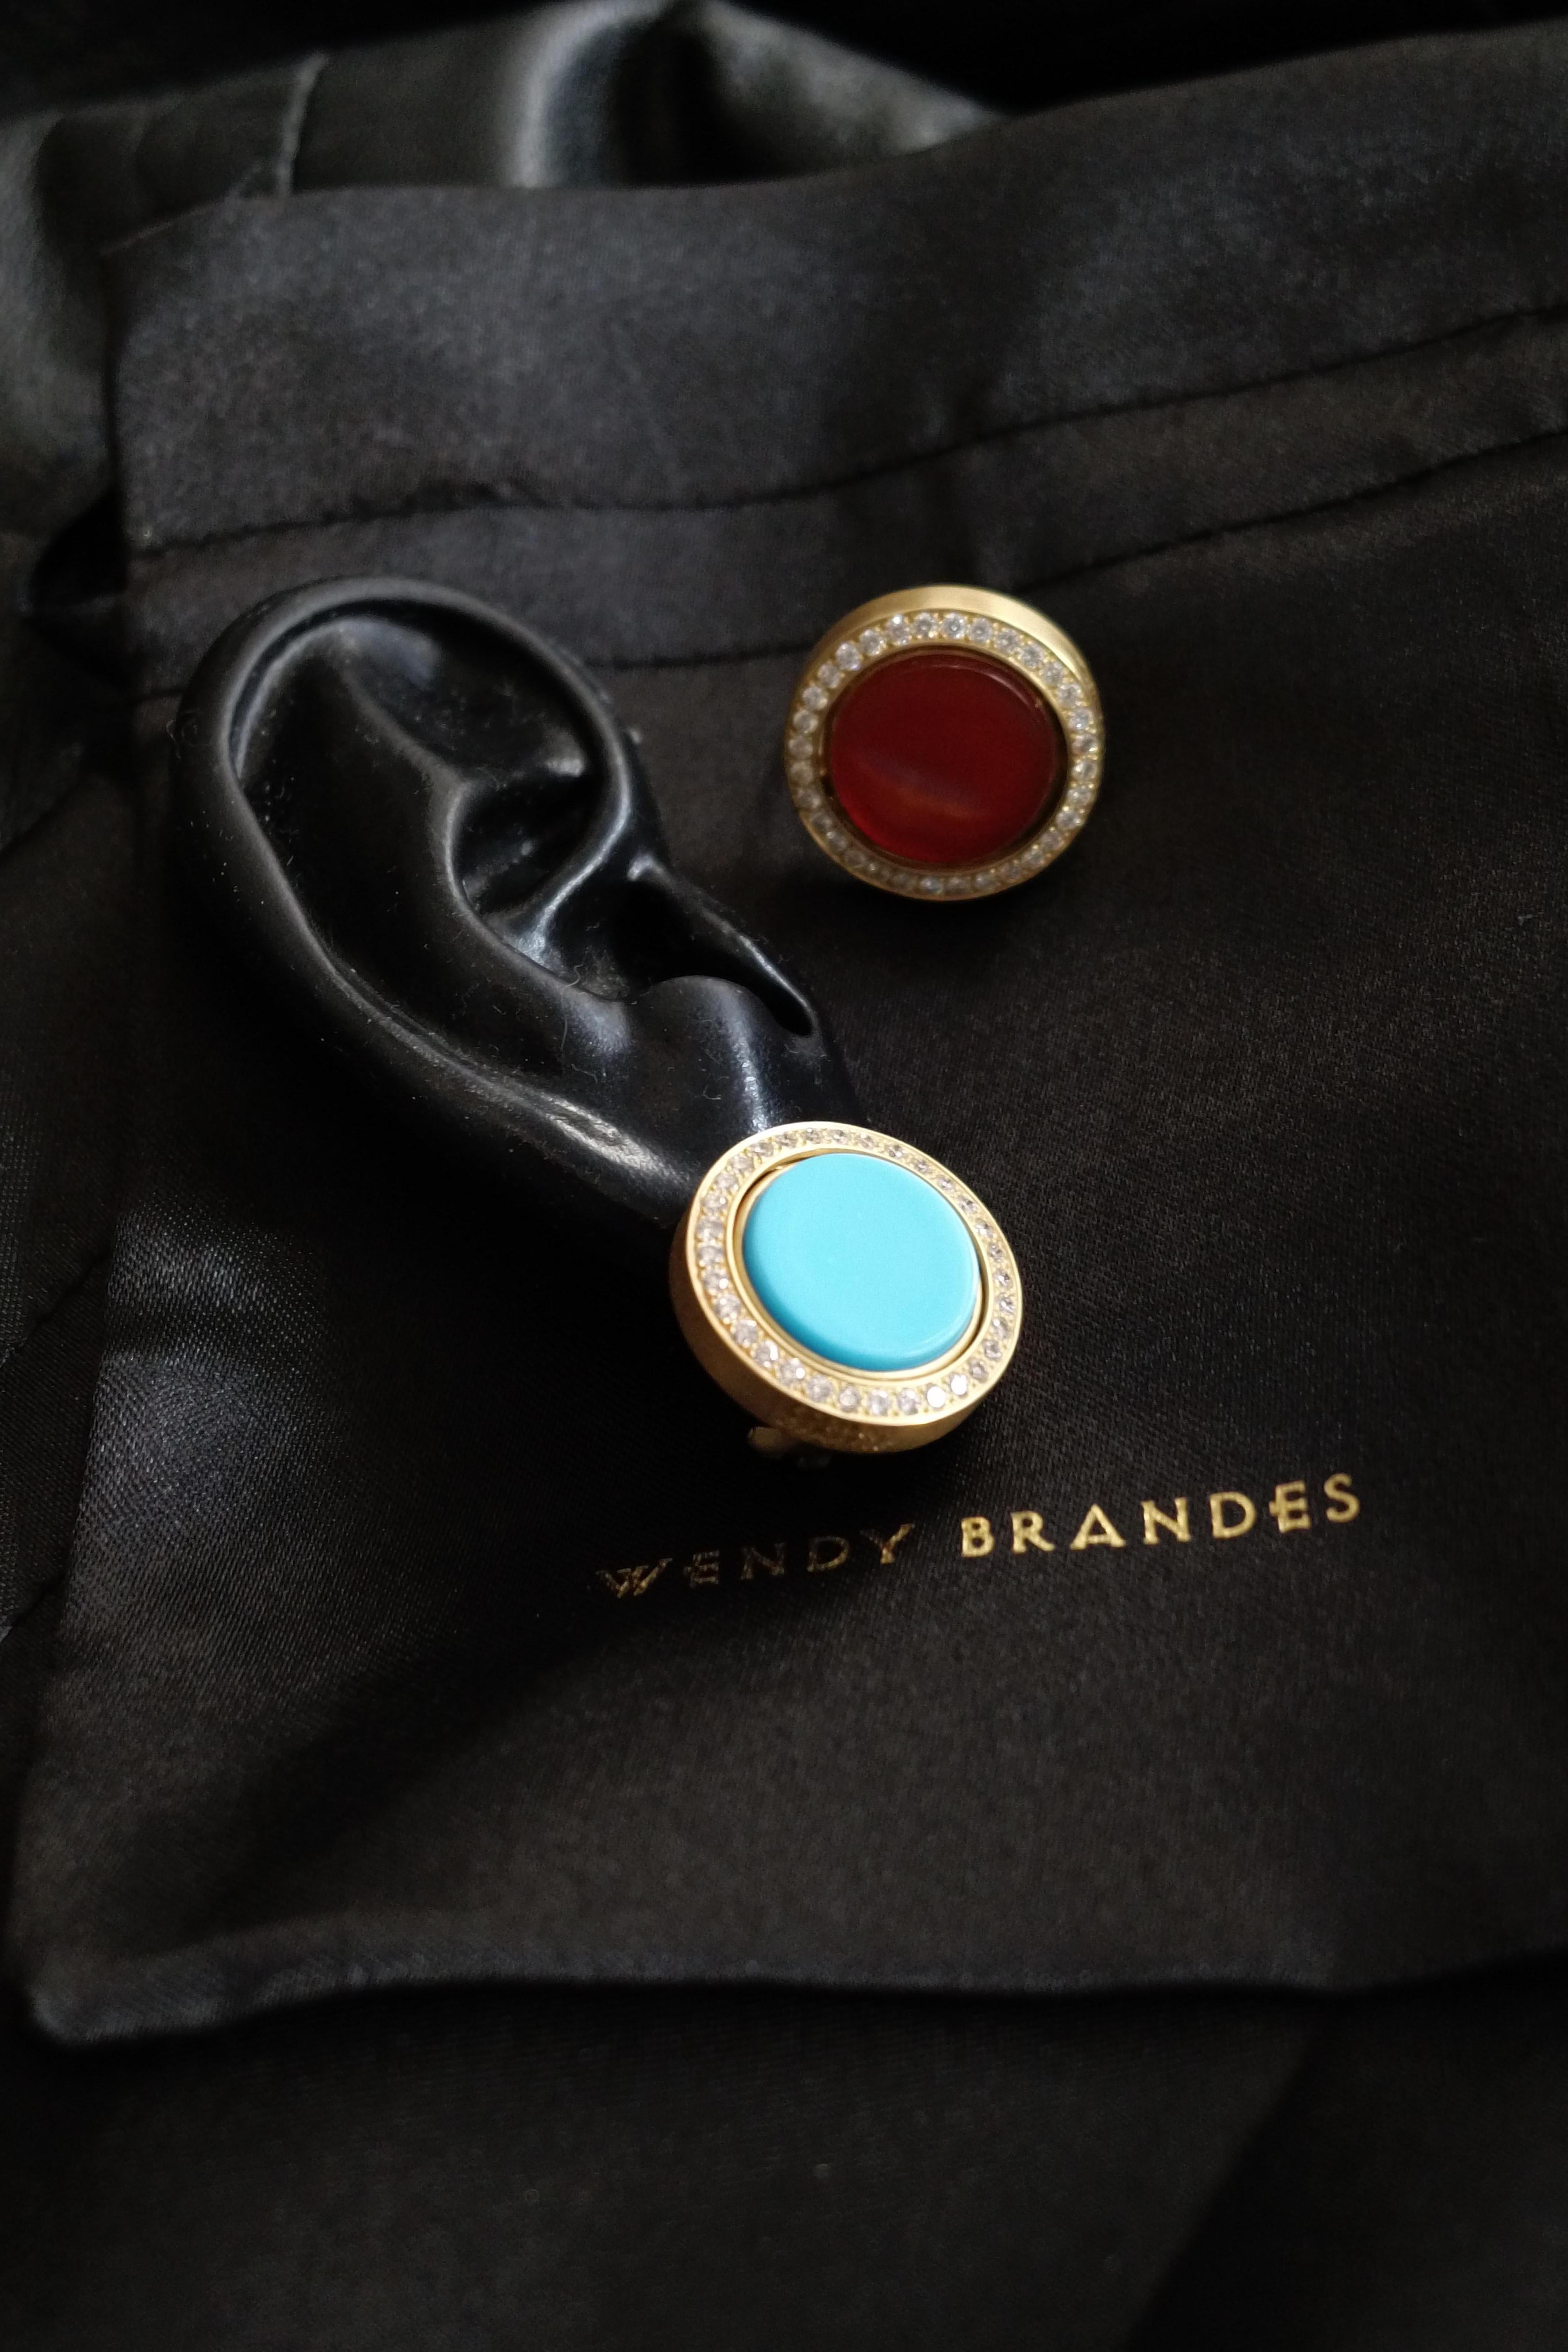 Wendy Brandes 2-in-1 Turquoise and Carnelian 18K Gold Swivel Ring & Earring Set 4